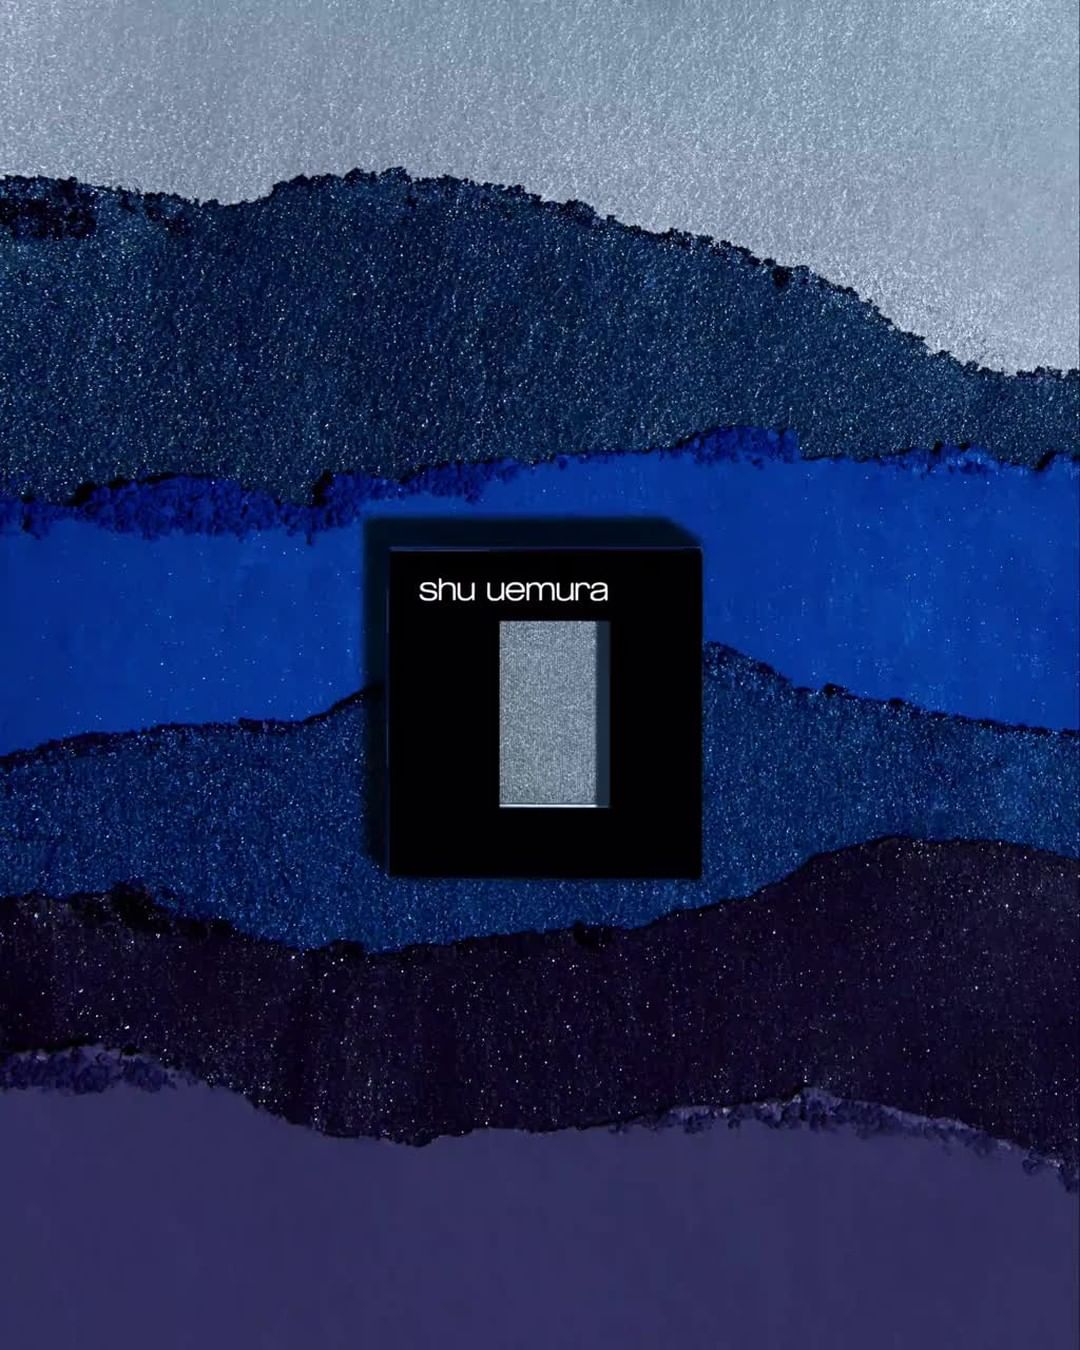 shu uemura - which indigo blue do you want to play with? 💦 ⁠
from the top: pressed eye shadow in PR violet blue, ME653, ME683A, M676, ME688, P696B, M667 ⁠
#shuuemura #pressedeyeshadow #coloratelier⁠